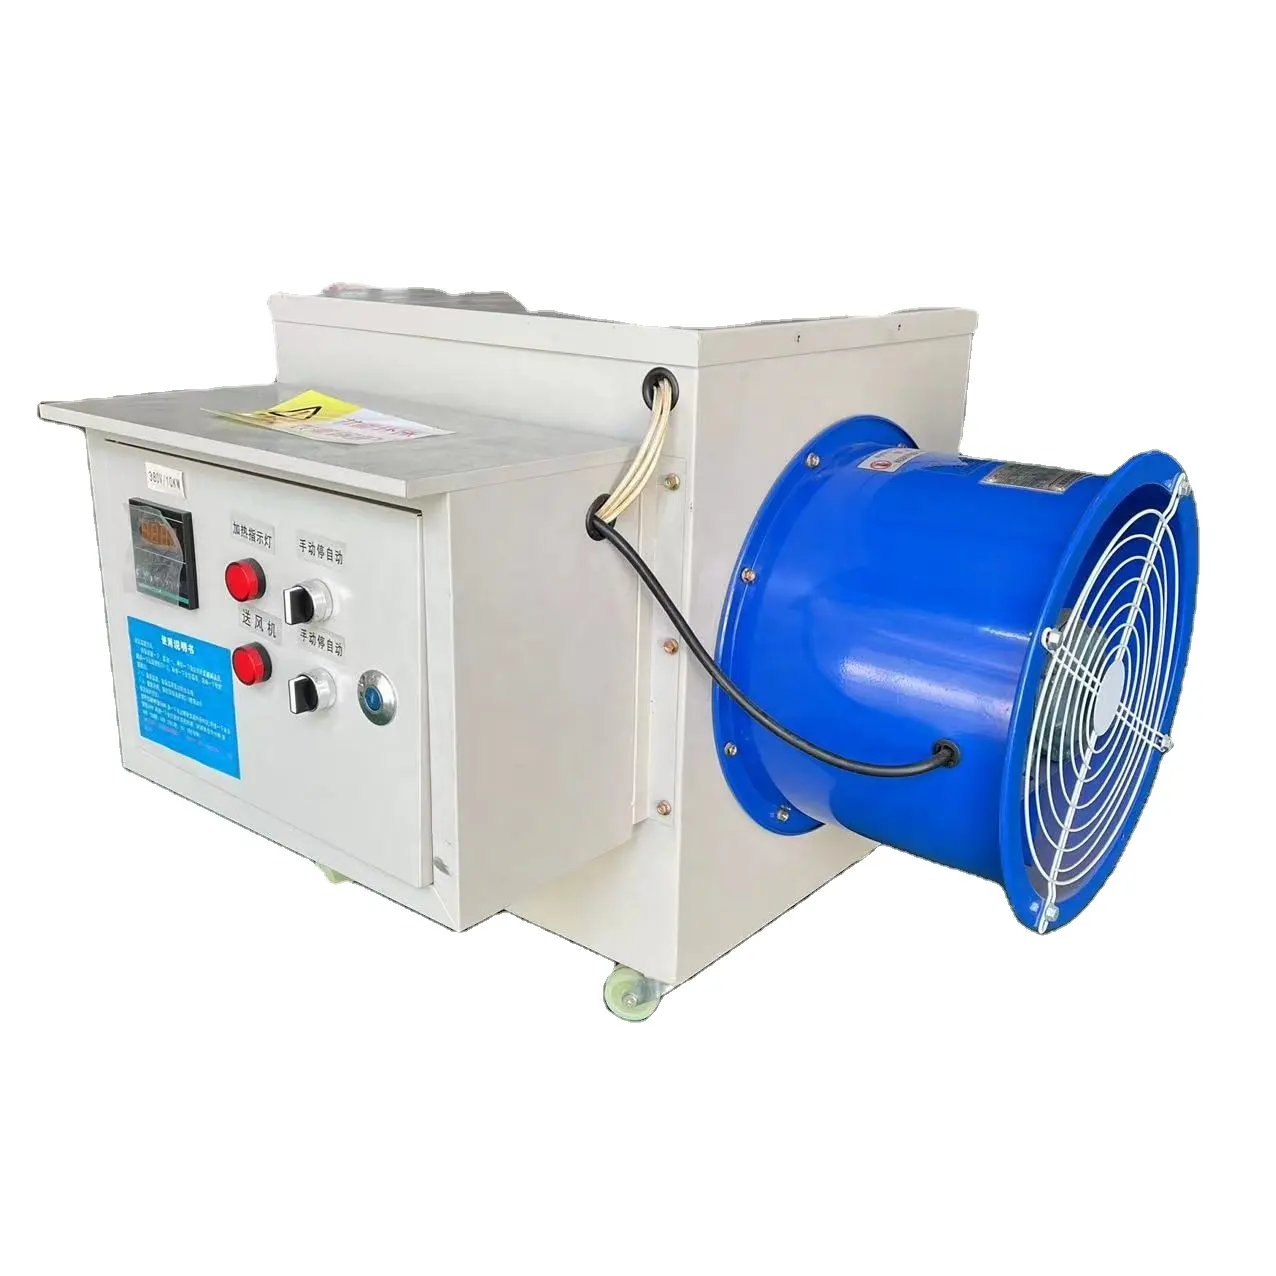 FM Air Blower Heating Exhaust Fan Machines Heating Equipment For Industrial Poultry House Greenhouse Electric Heater